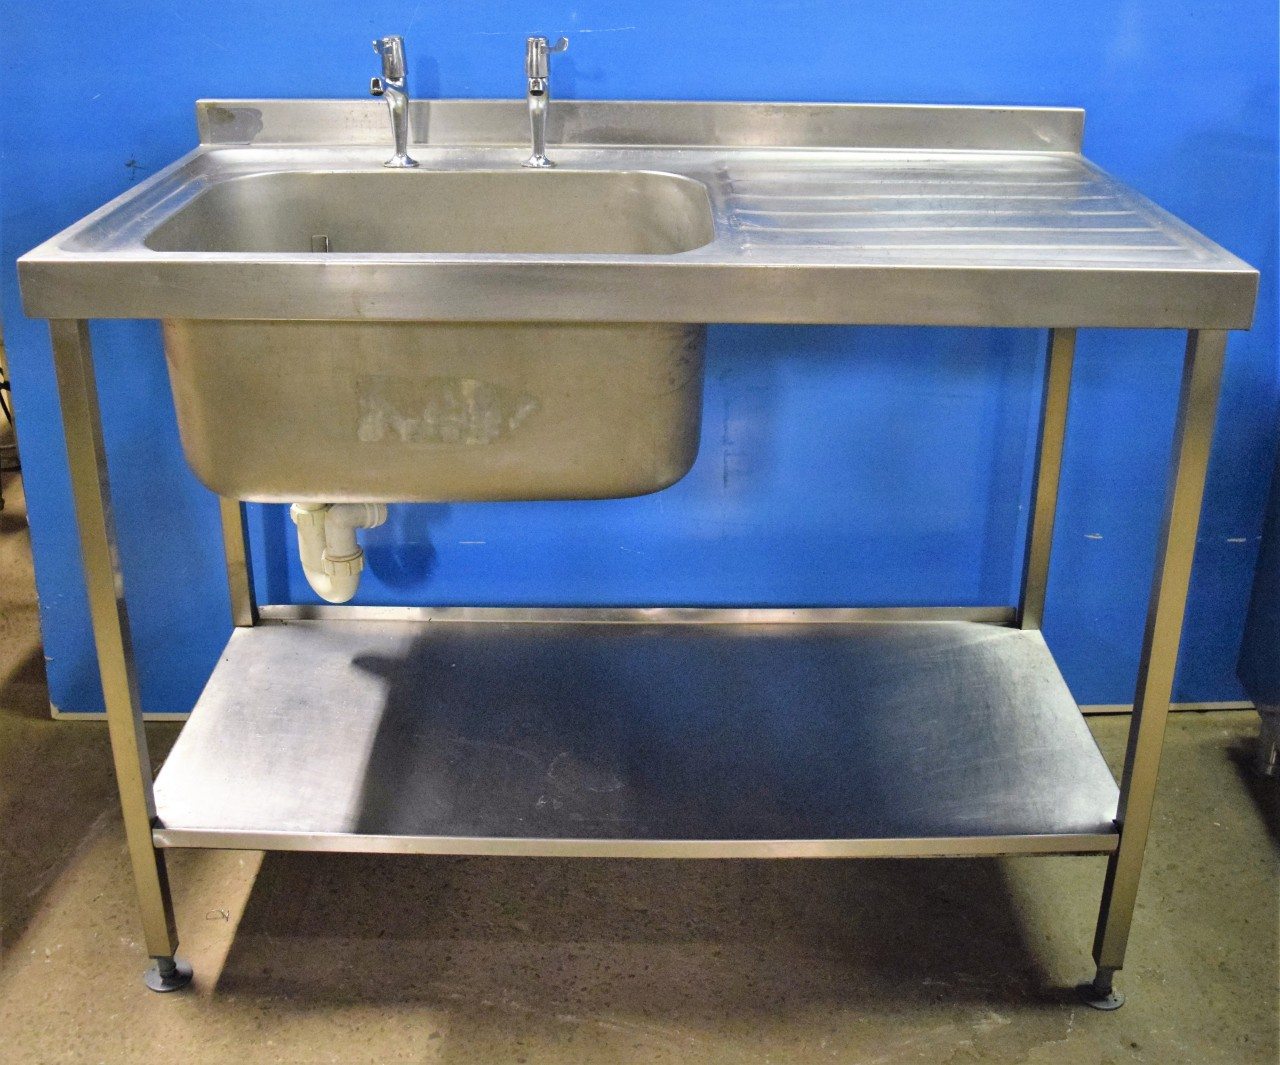 STAINLESS STEEL Single Left Hand Bowl Single Drainer Sink – Super condition 1